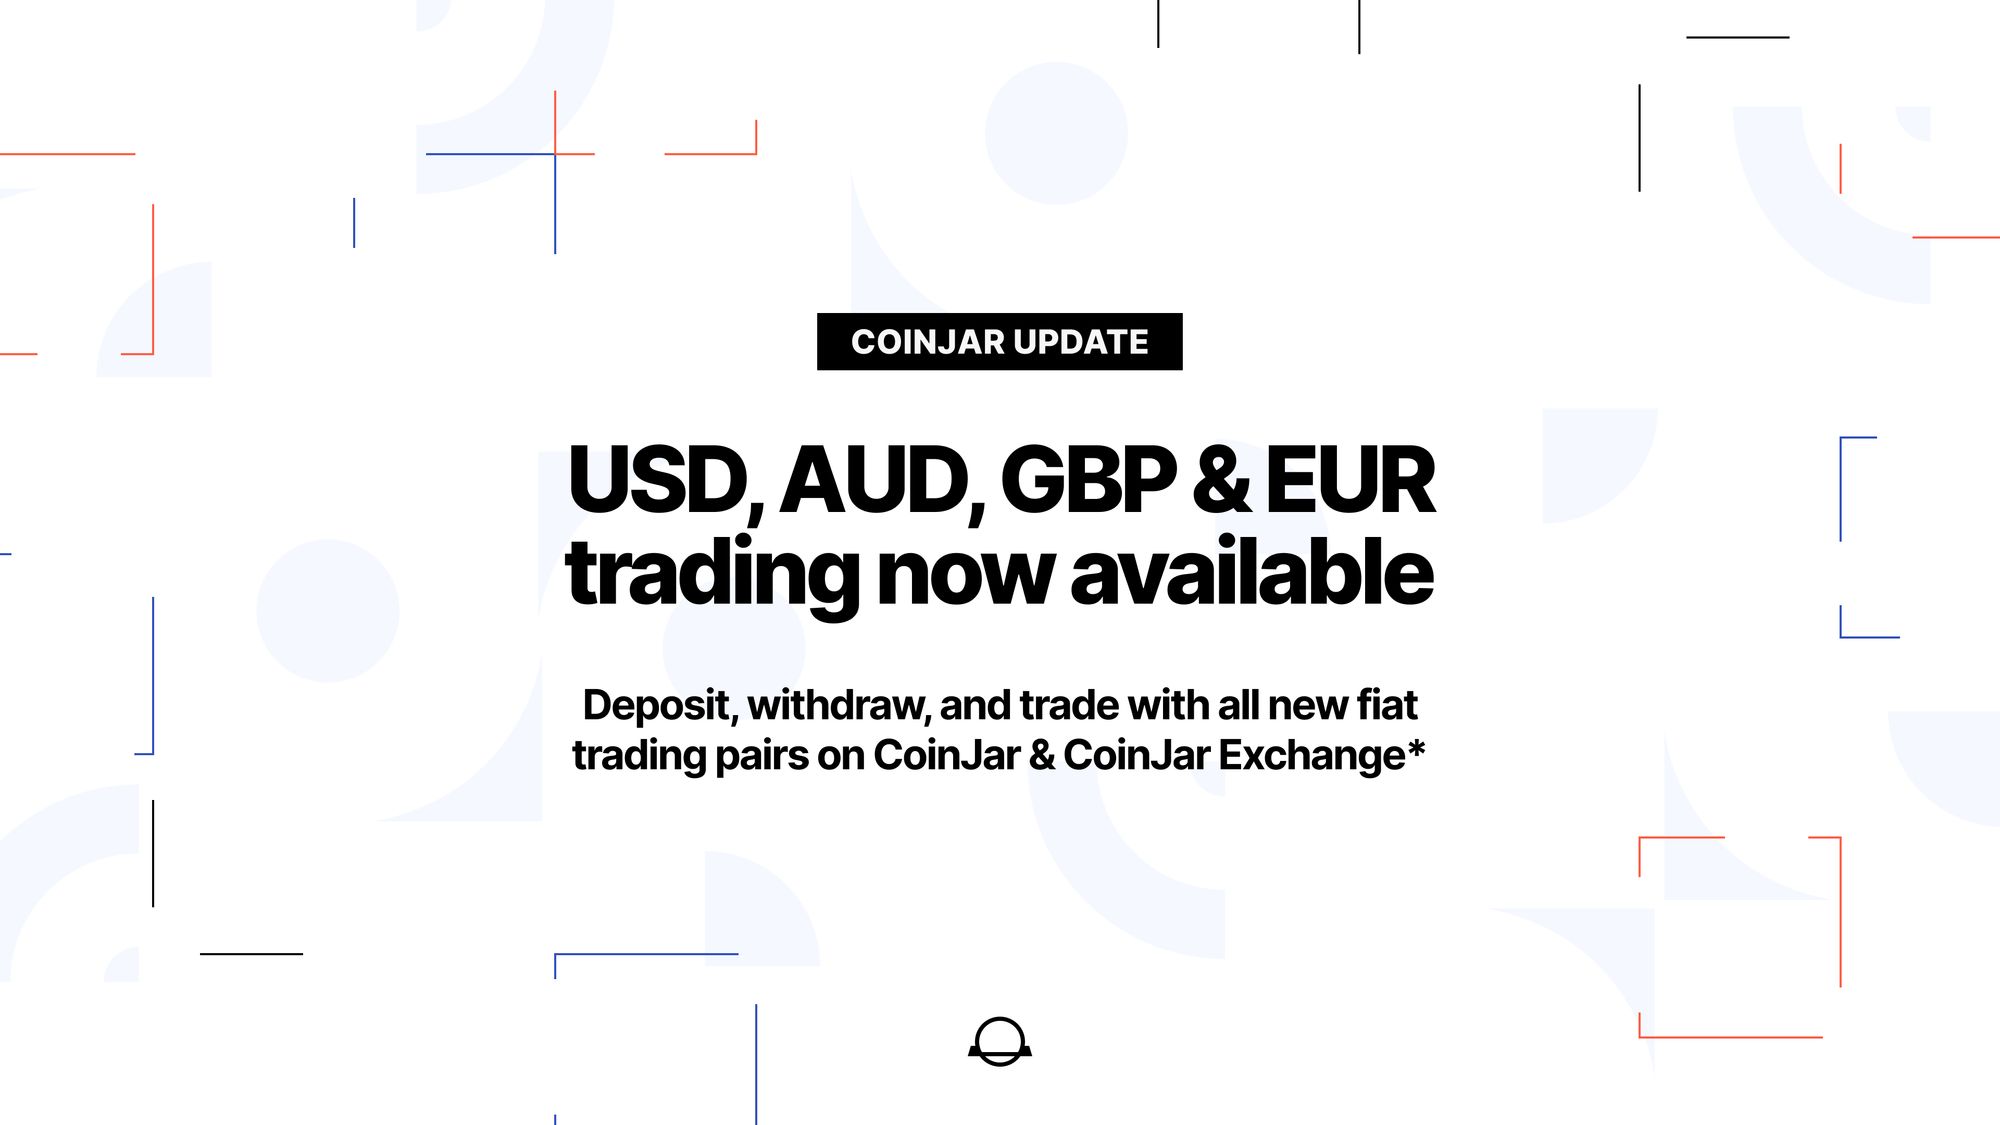 CoinJar now supports USD (temporary paused) and EUR in addition to AUD and GBP for Trading, Deposits, and Withdrawals